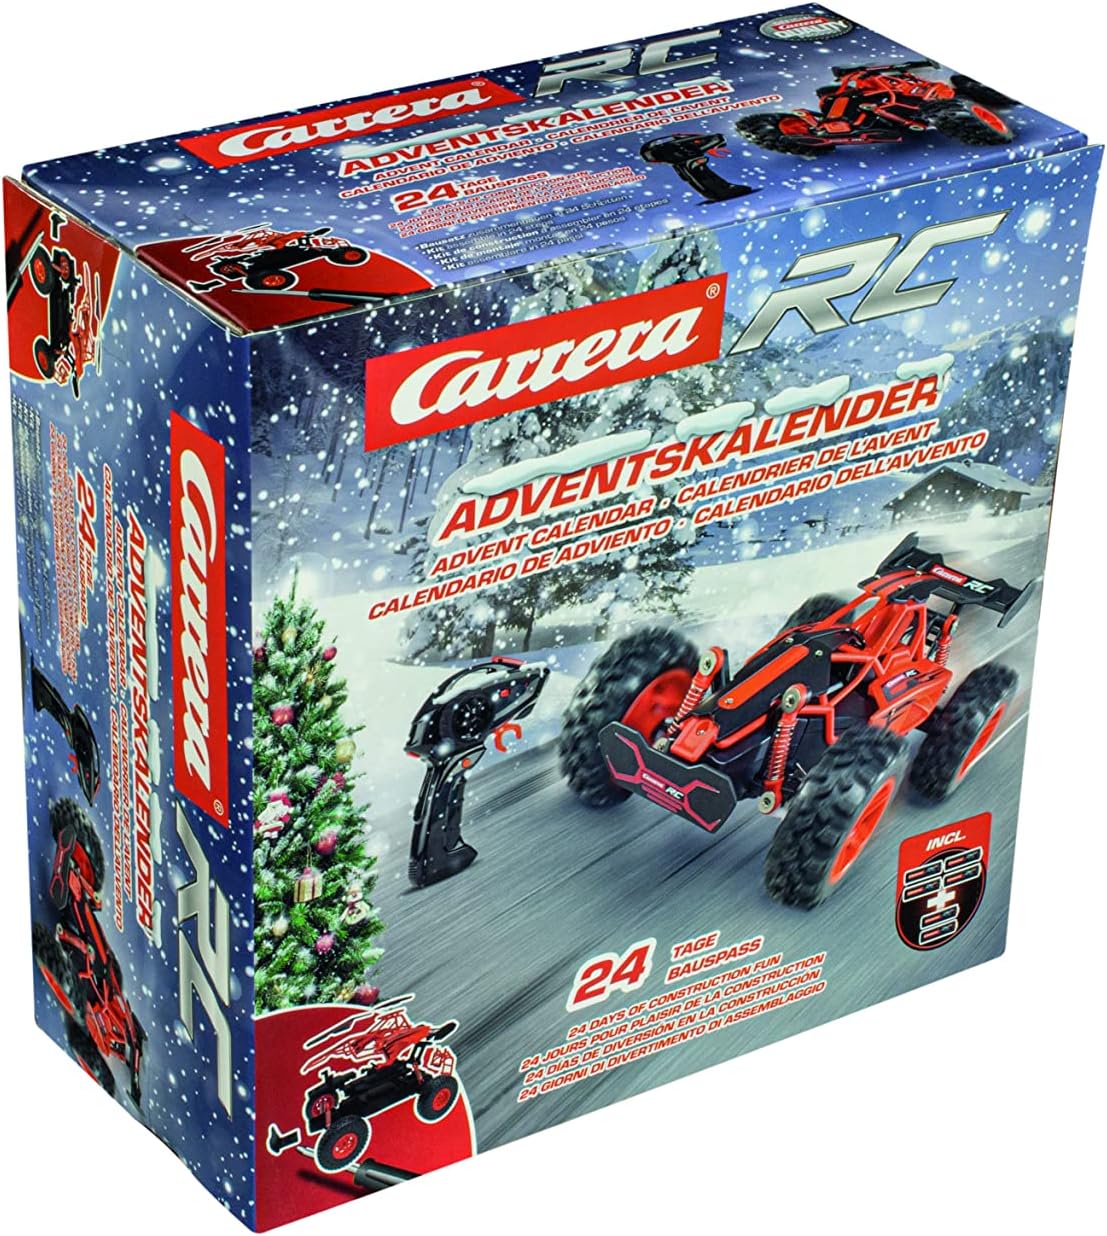 Carrera RC Buggy Advent Calendar 2.0 I Advent Calendar for Children & Adults, Boys & Girls I Building Fun Over 24 Days I Perfect for RC Enthusiasts I Remote Controlled Buggy